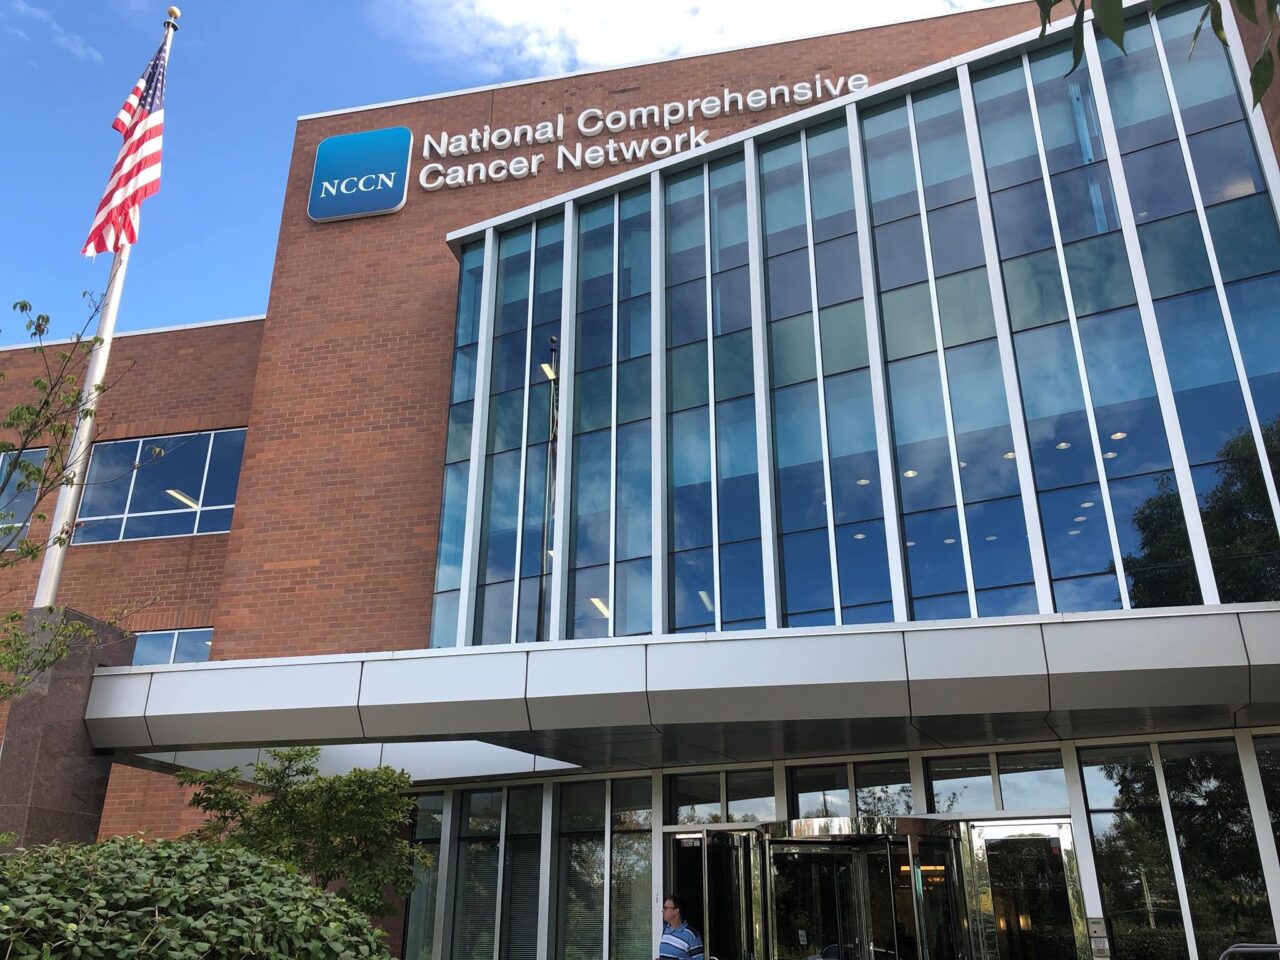 Oncology research program by National Comprehensive Cancer Network